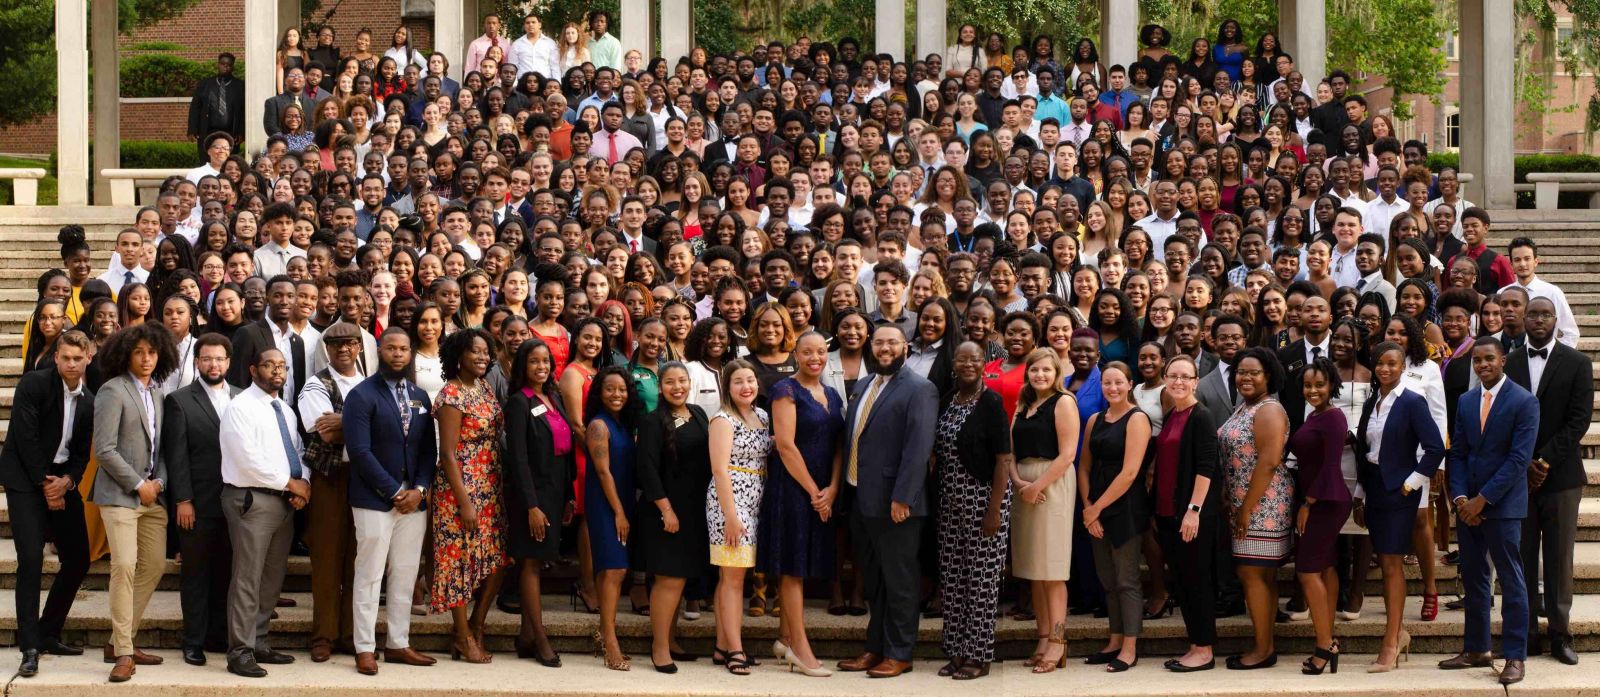 Offerings like the CARE Summer Bridge program can help ease the transition to class and college life. The 2019 class, pictured here, included more than 400 first-generation college students.